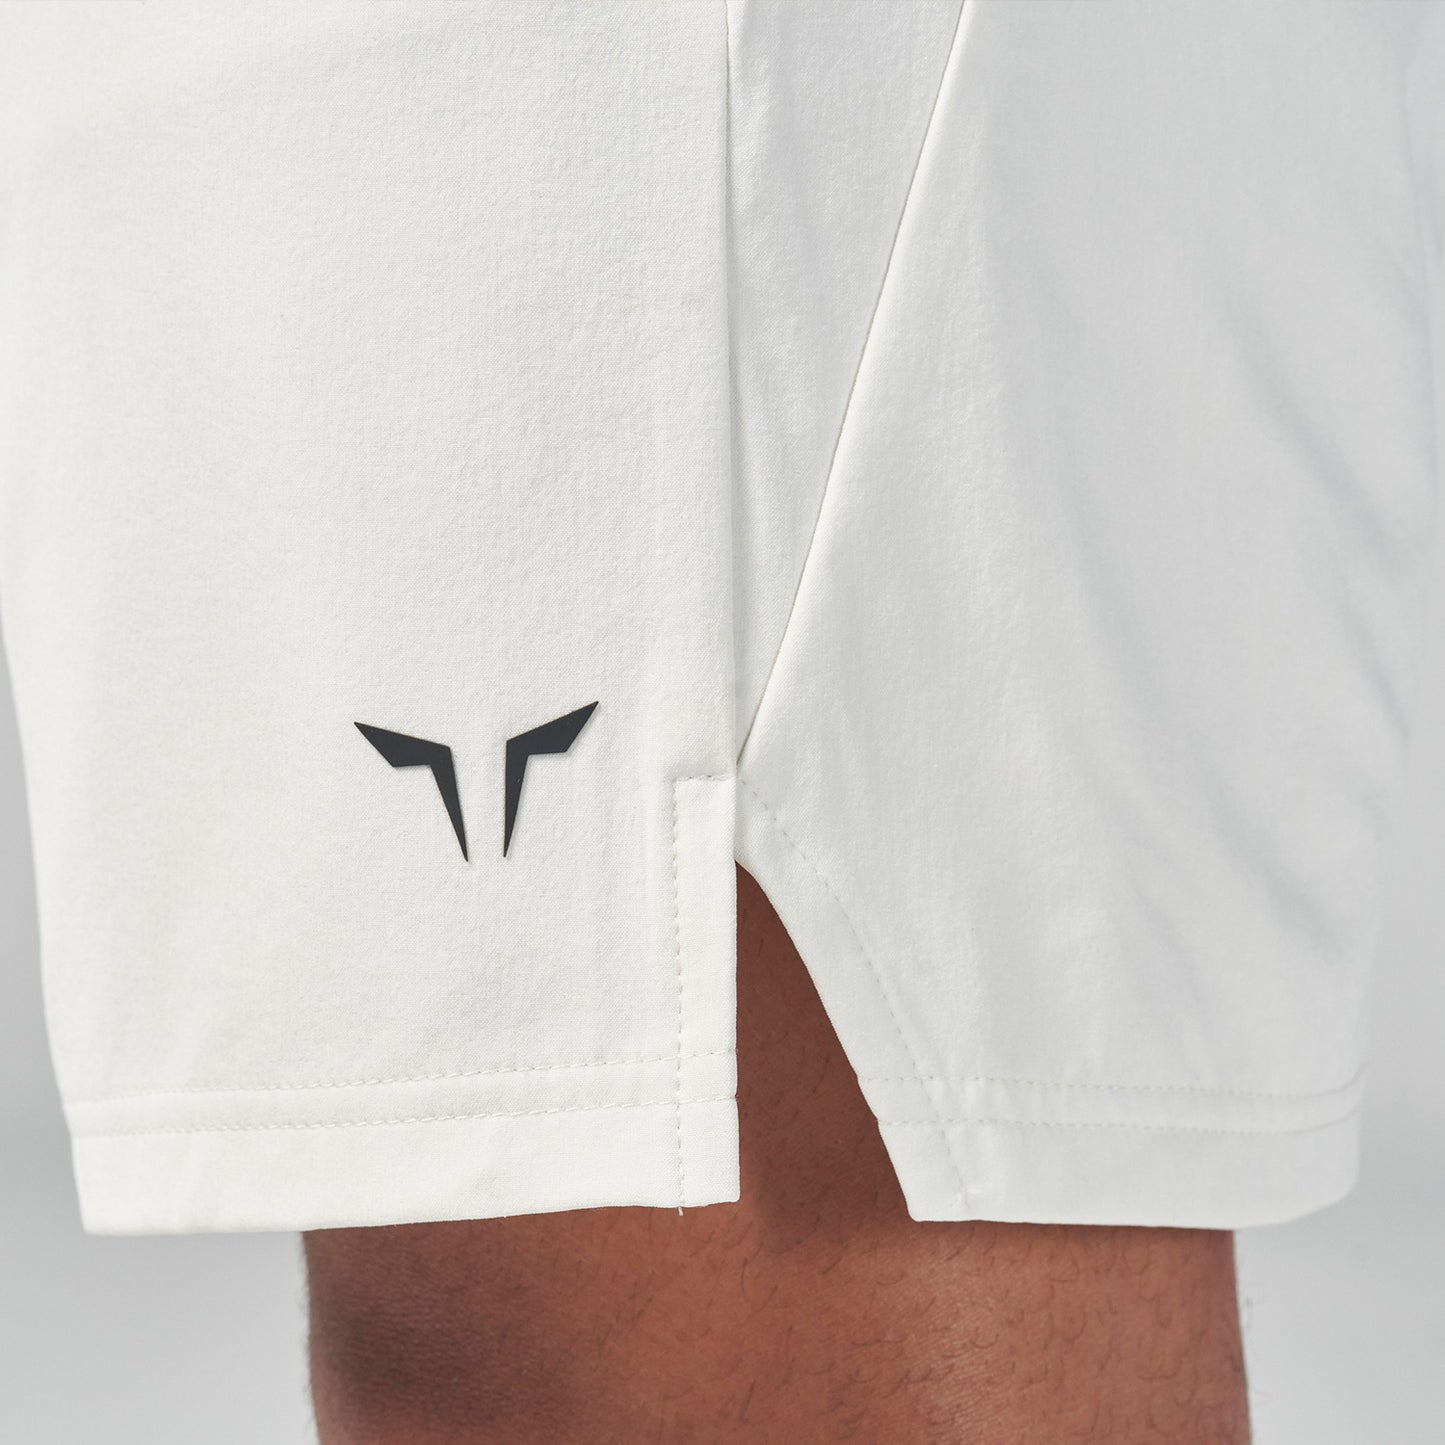 Essential 7 Inch Shorts - Pearl White